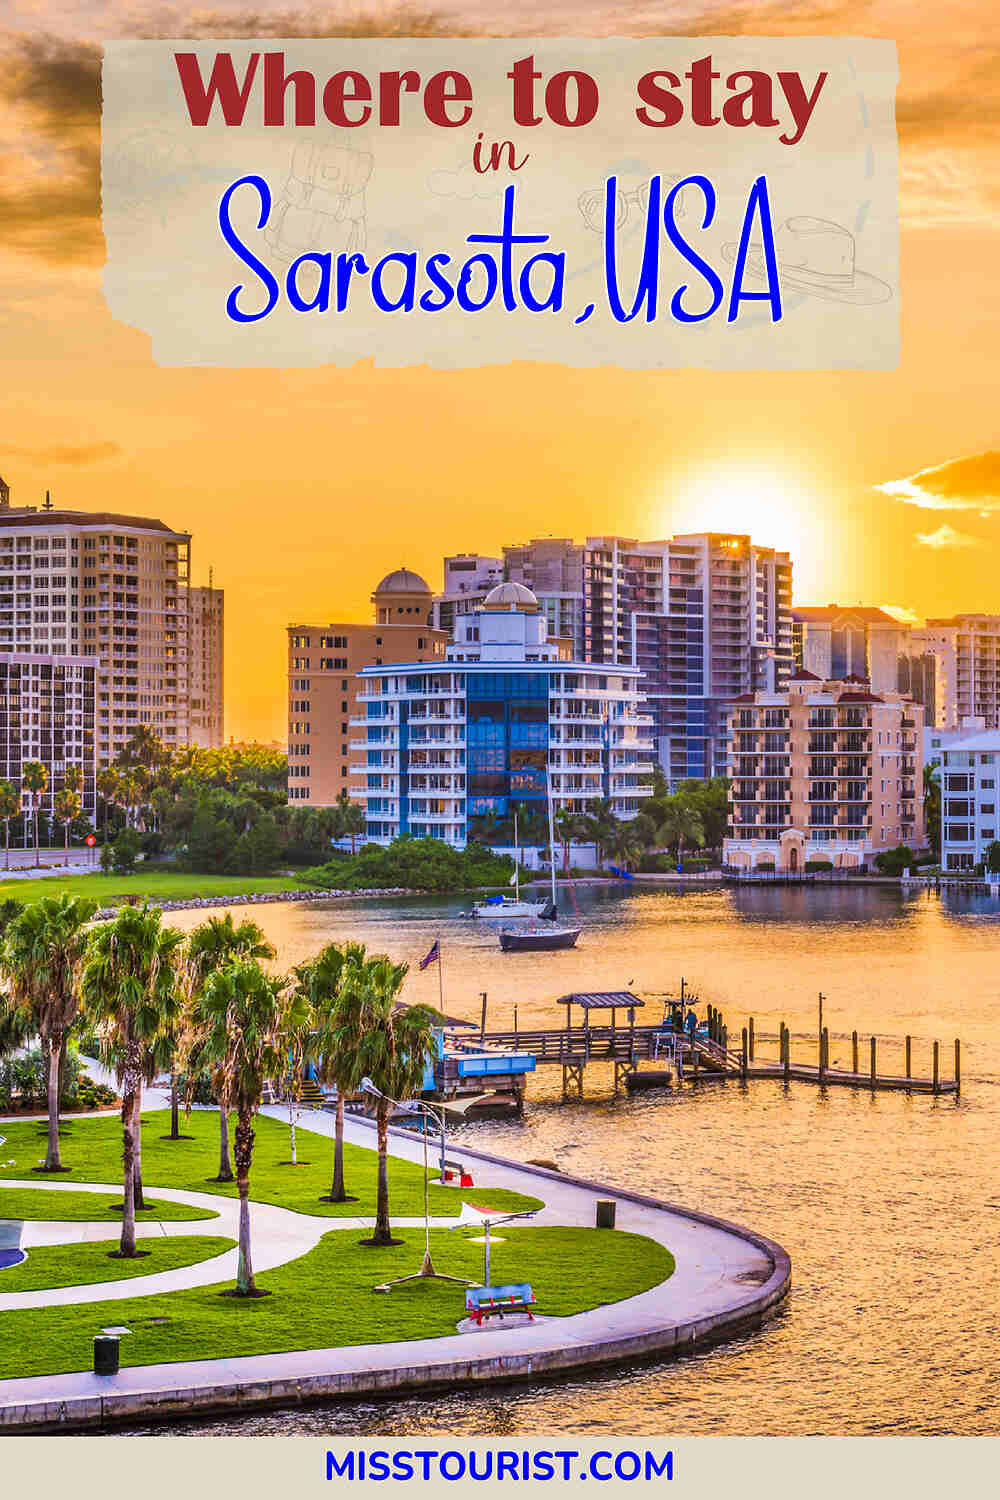 Where to Stay in Sarasota PIN 4